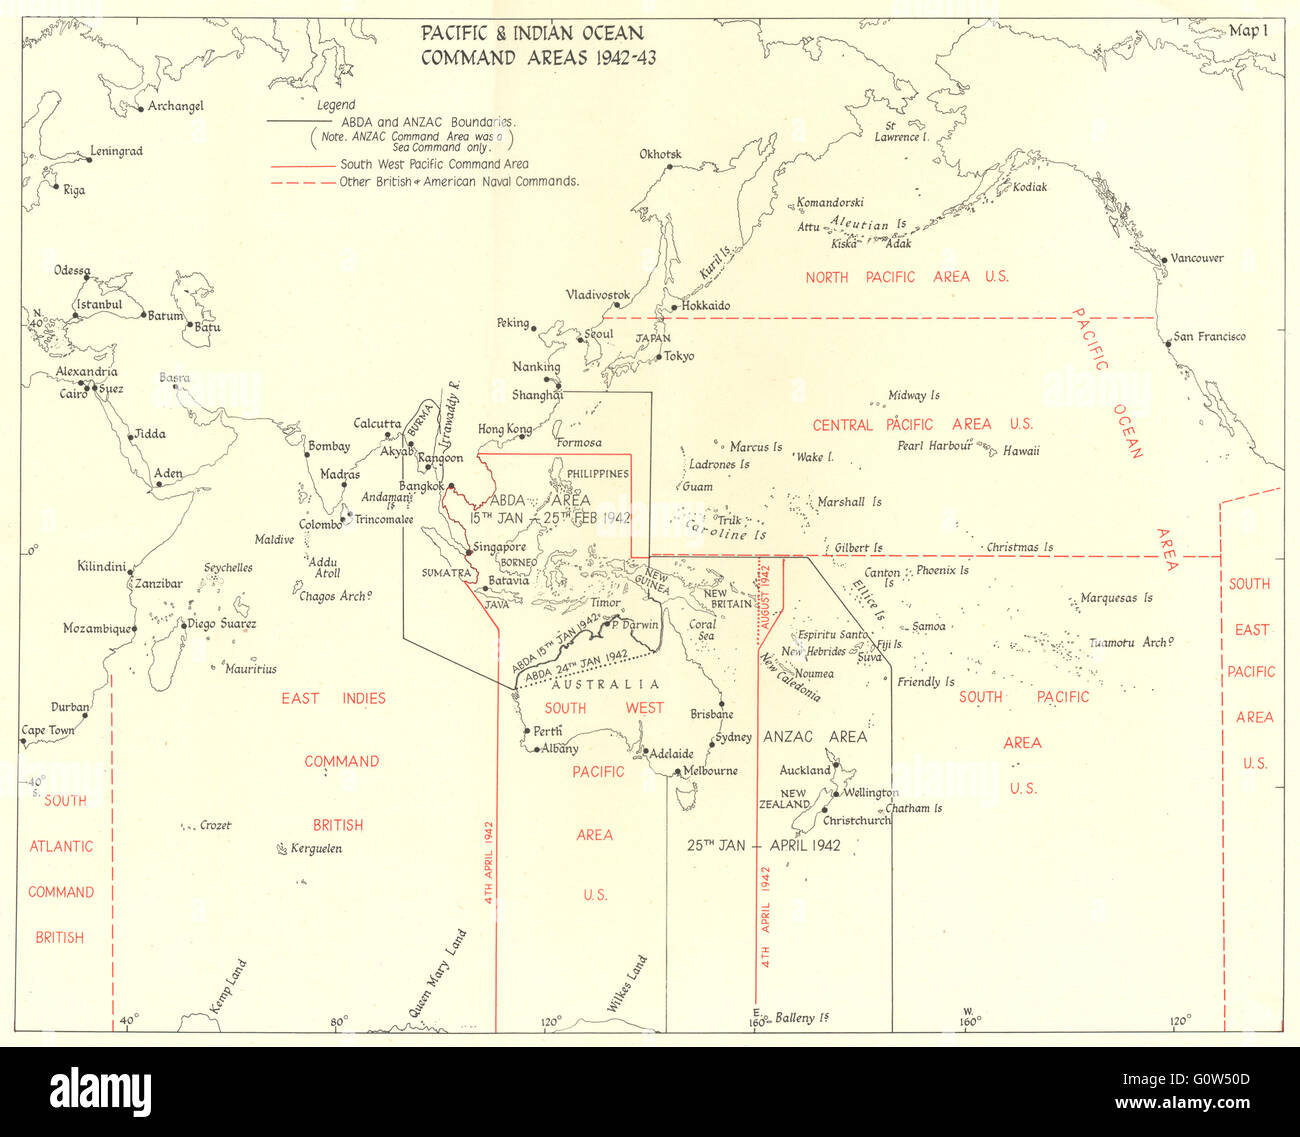 PACIFIC AND INDIAN OCEAN: Command areas 1942-43, 1956 vintage map Stock Photo